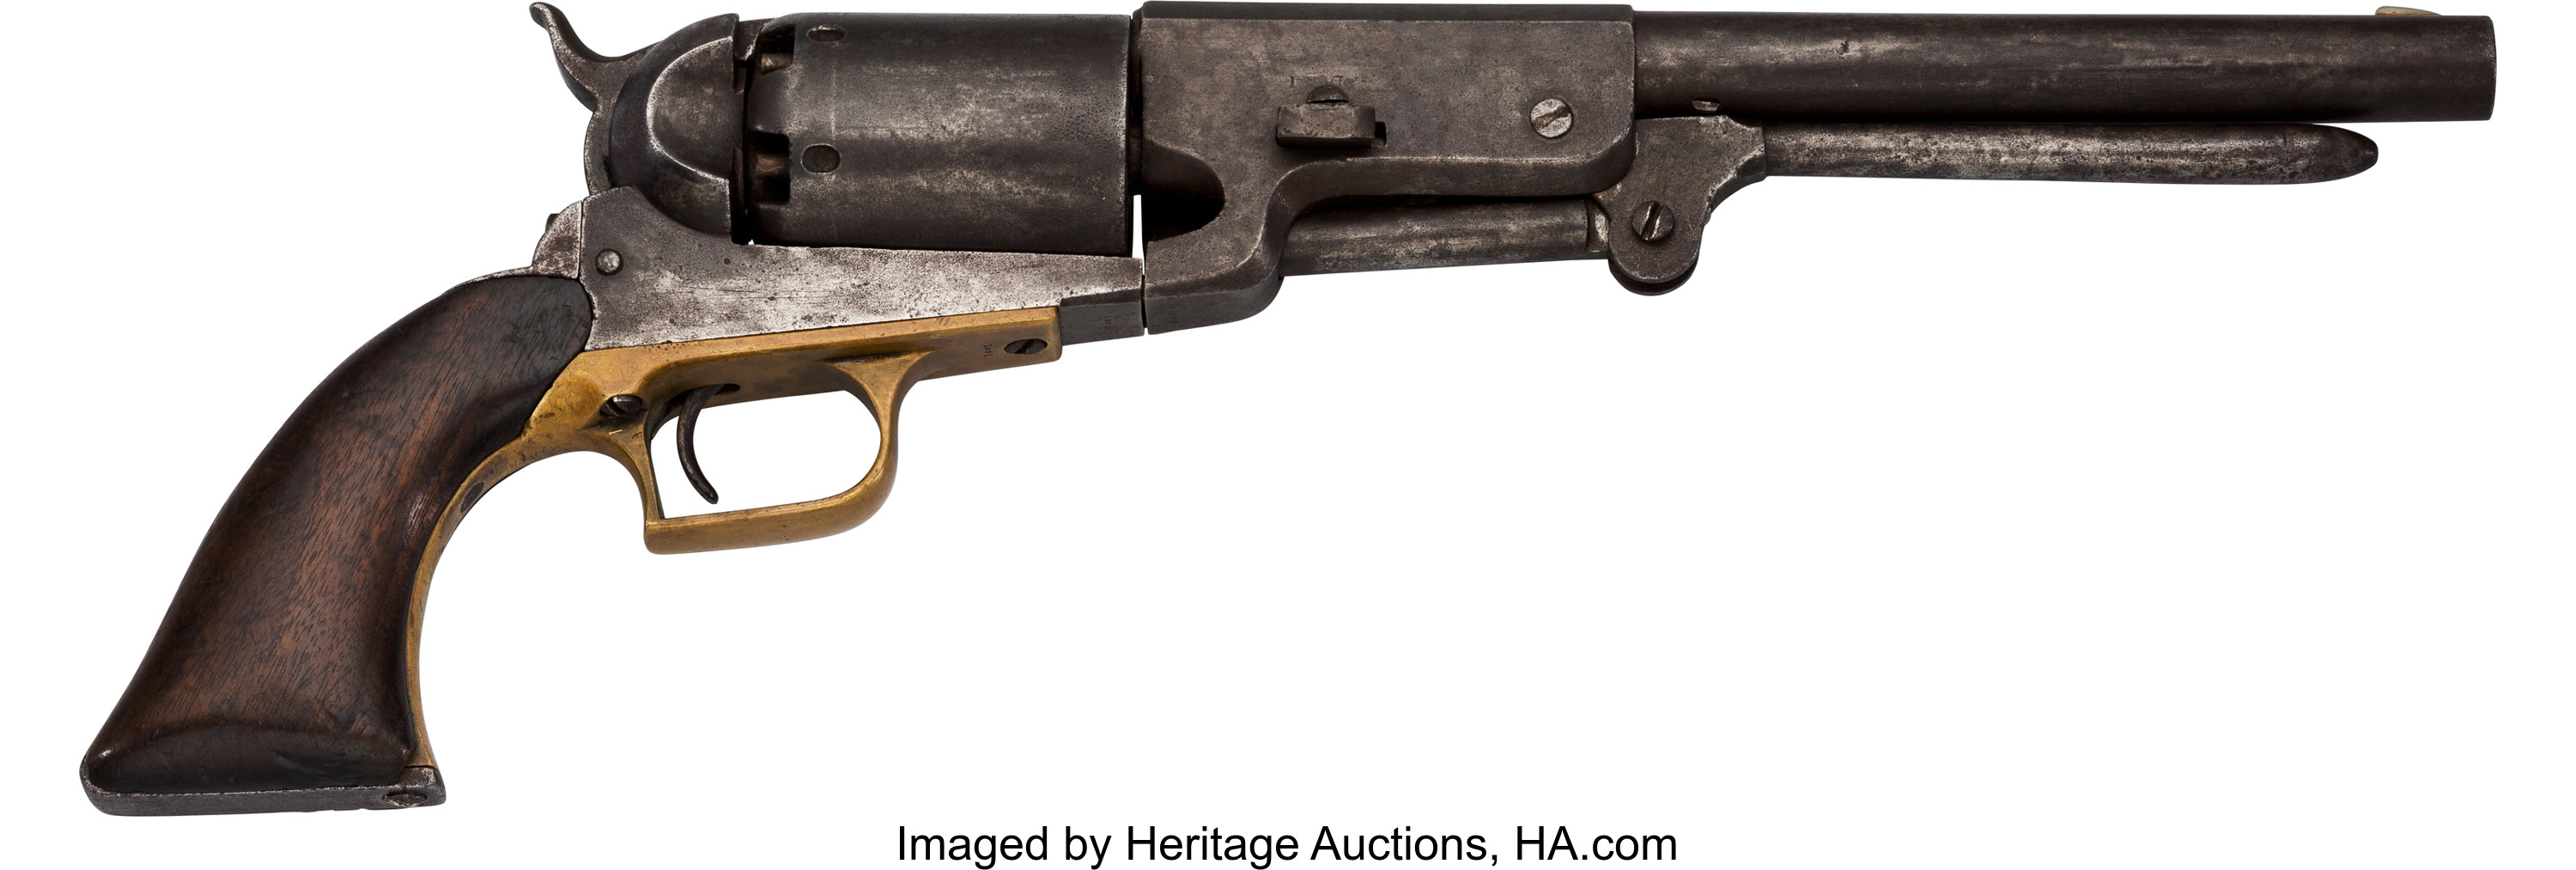 Two Big Bangs For Colt Pistols At HeritageAntiques And The Arts Weekly